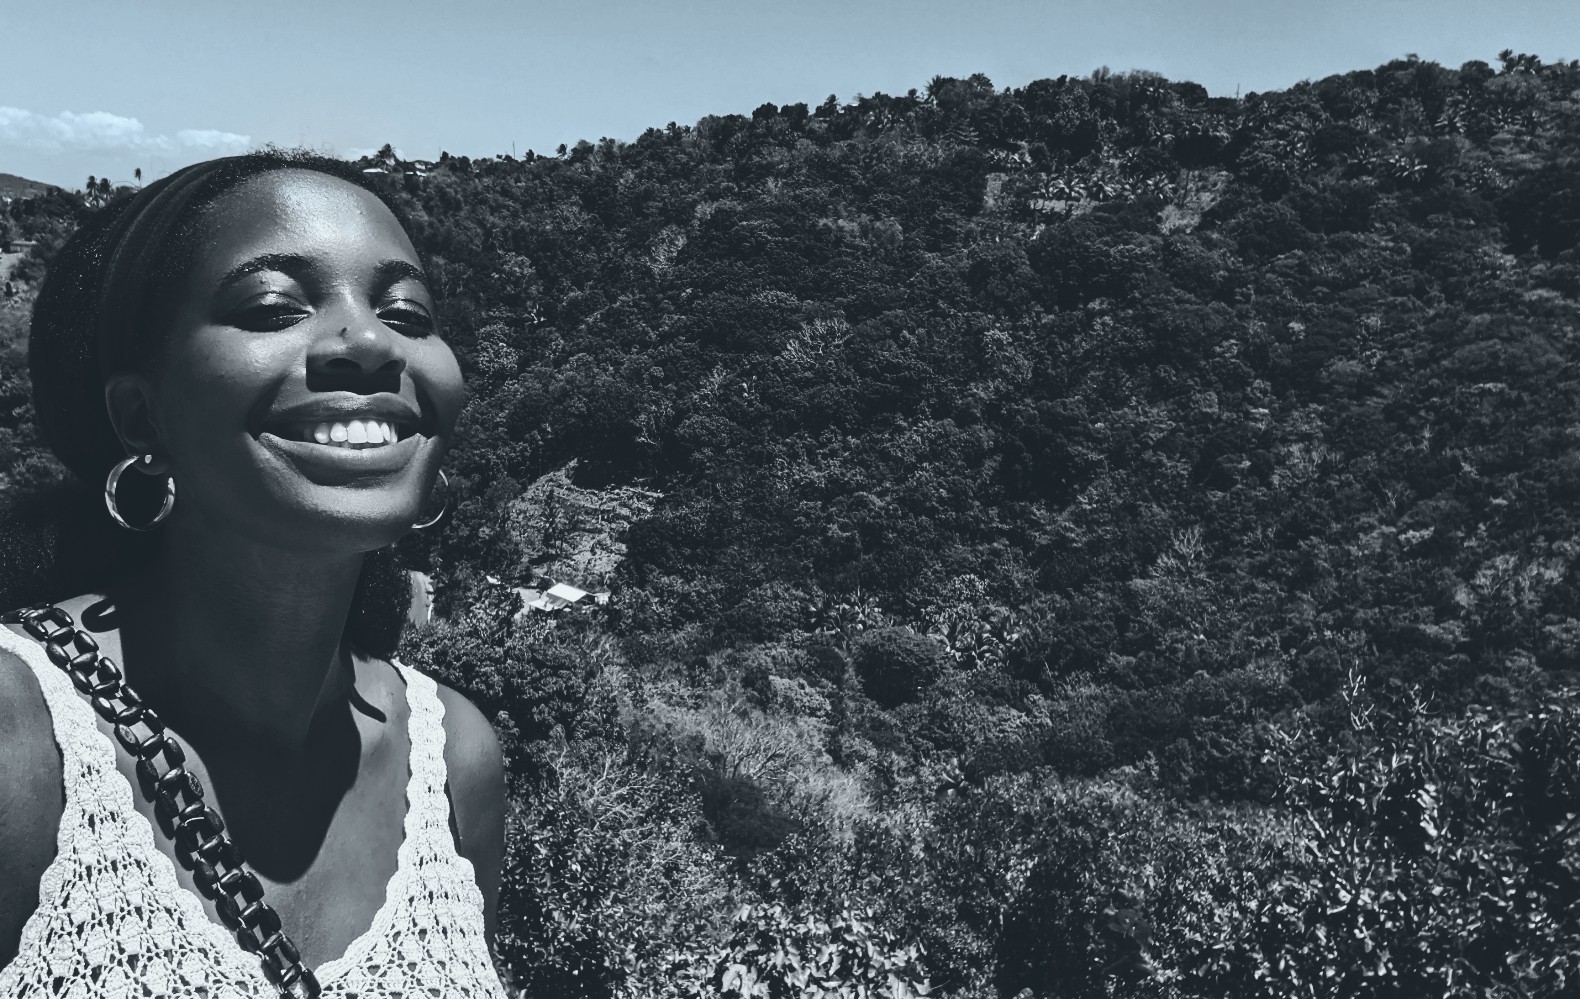 Jaccaidi smiles against a mountain view with lush vegetation, the image is black and white but is sunny